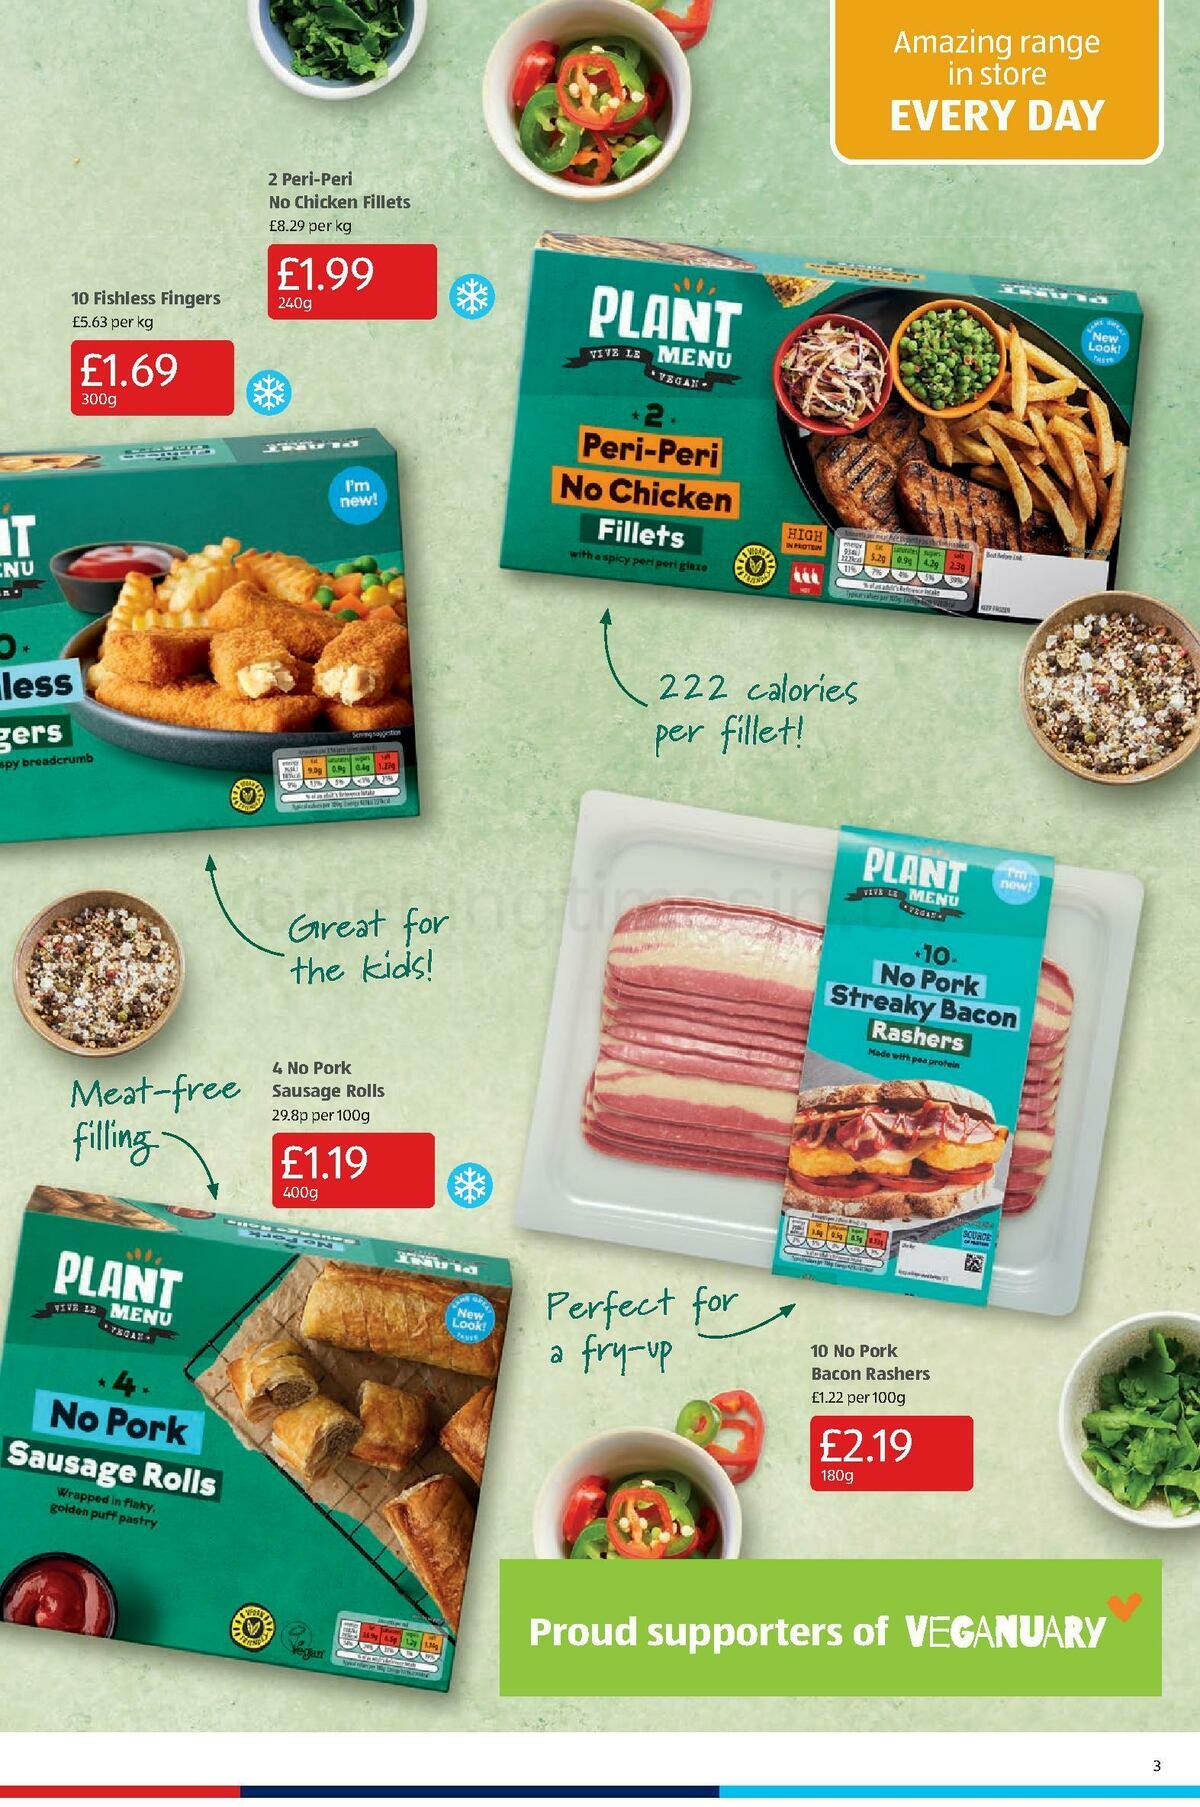 ALDI Offers from January 16